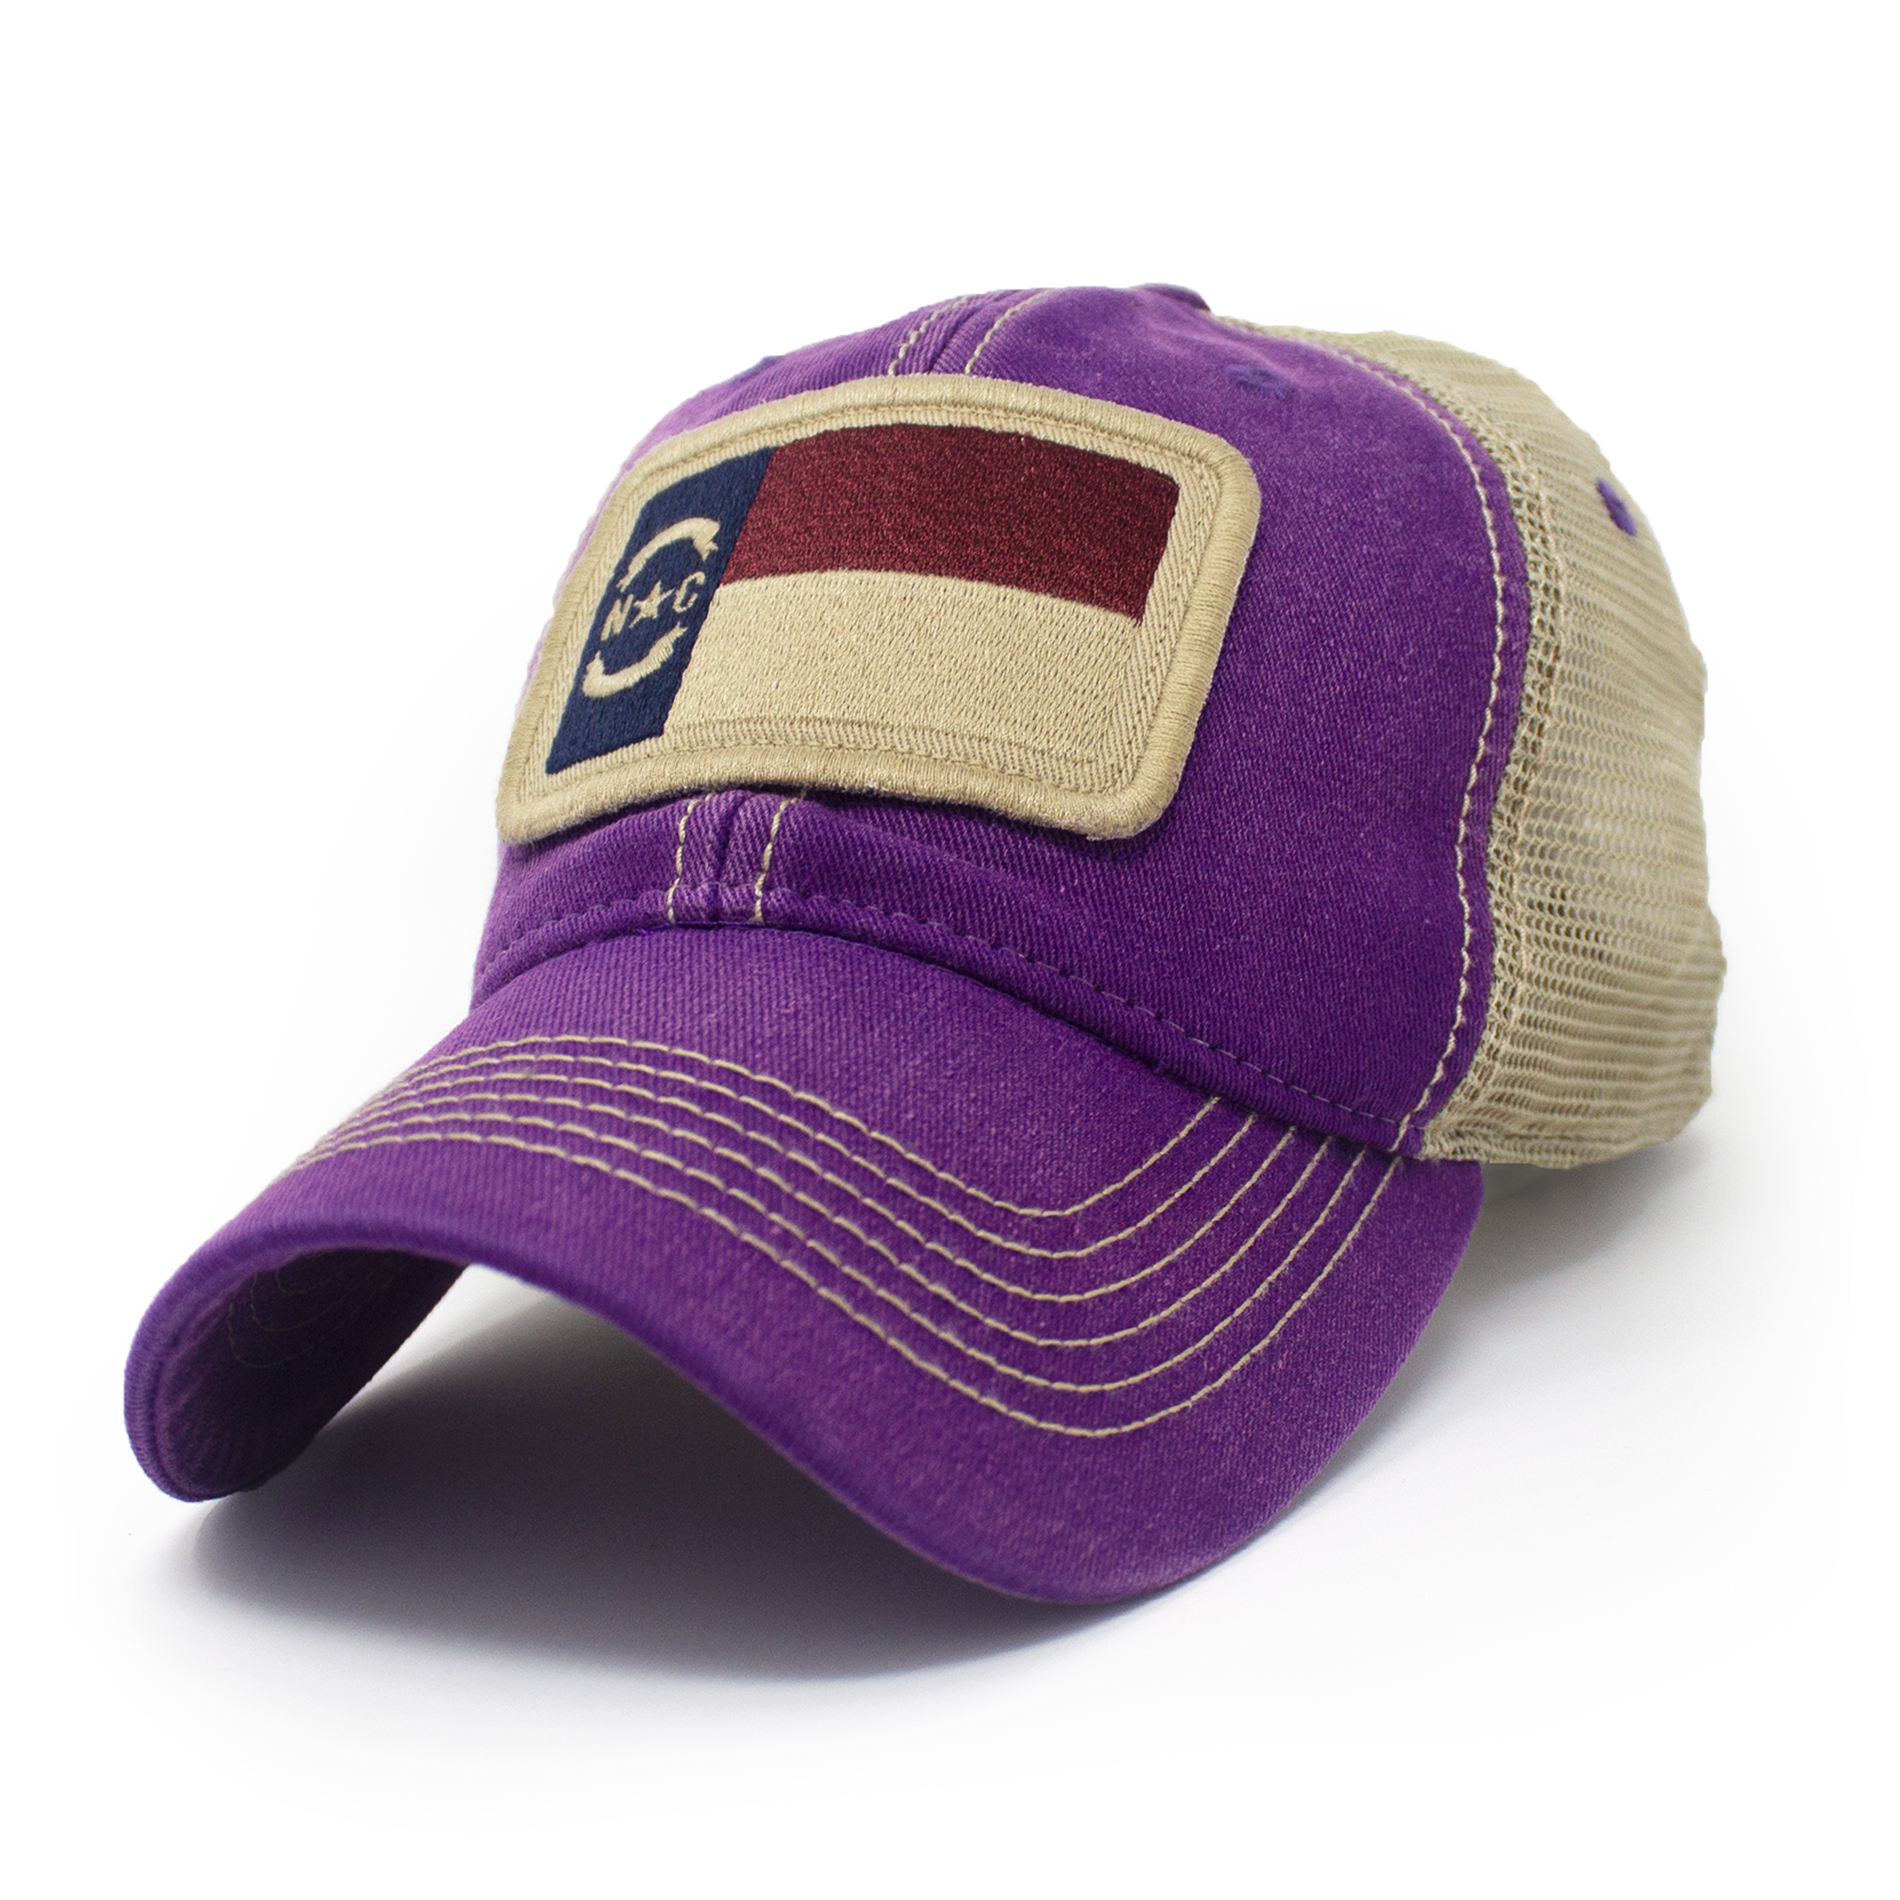 Trucker hat with khaki colored mesh backing, purple cotton front panel and bill with tan stitching. Ballcap has an embroidered patch of the North Carolina flag in in the center.